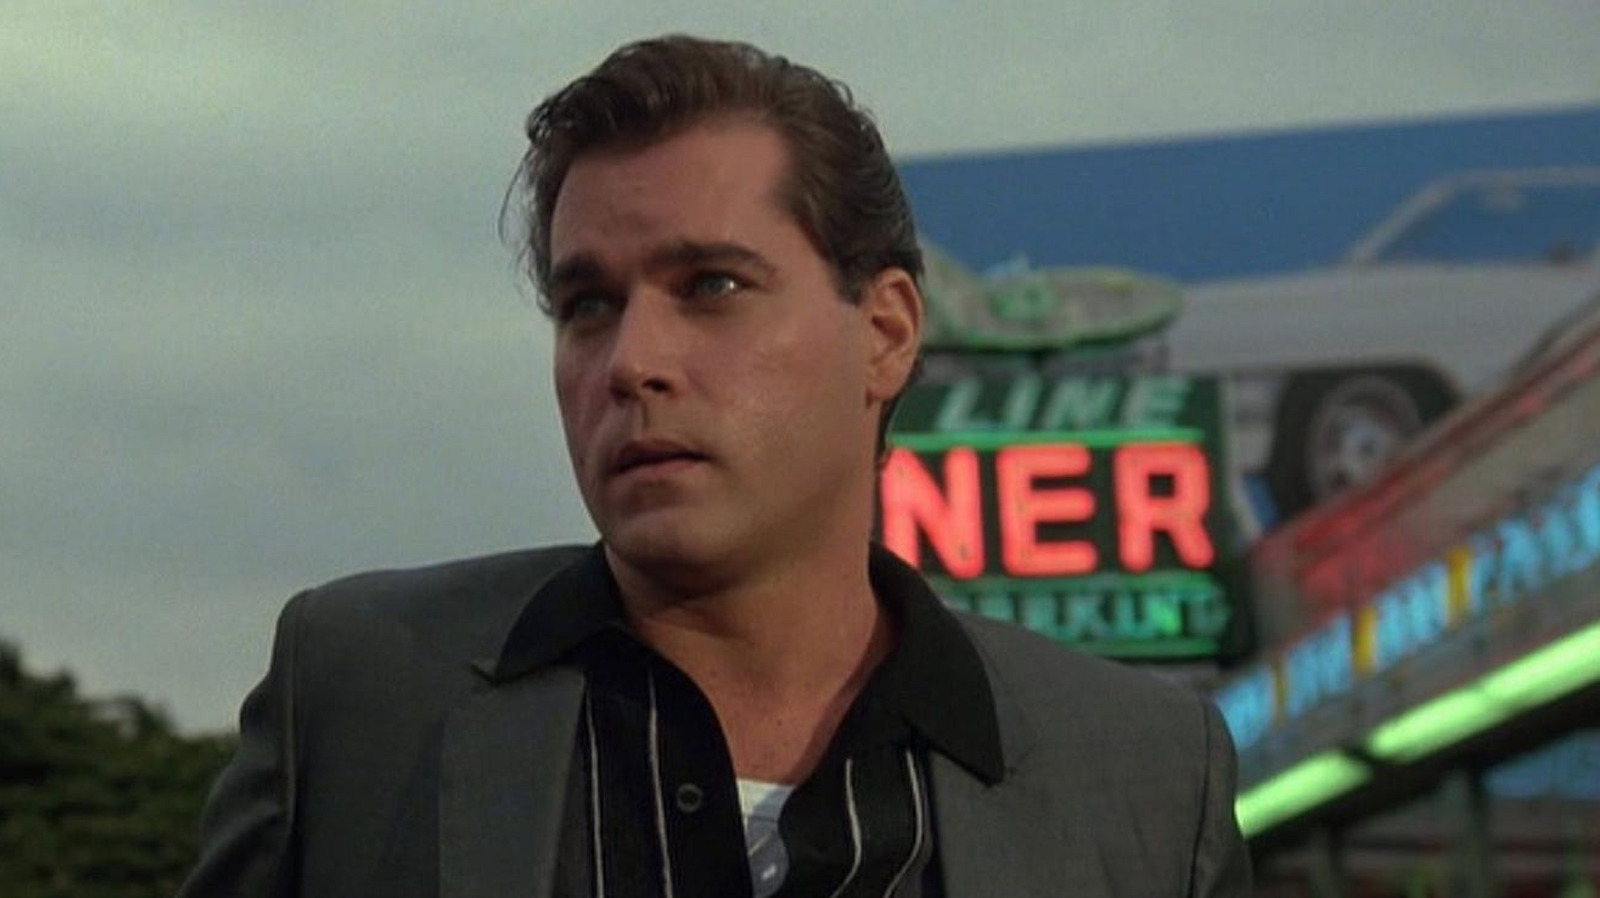 Ray Liotta’s Best Role Happened During A Tragic Time In His Life